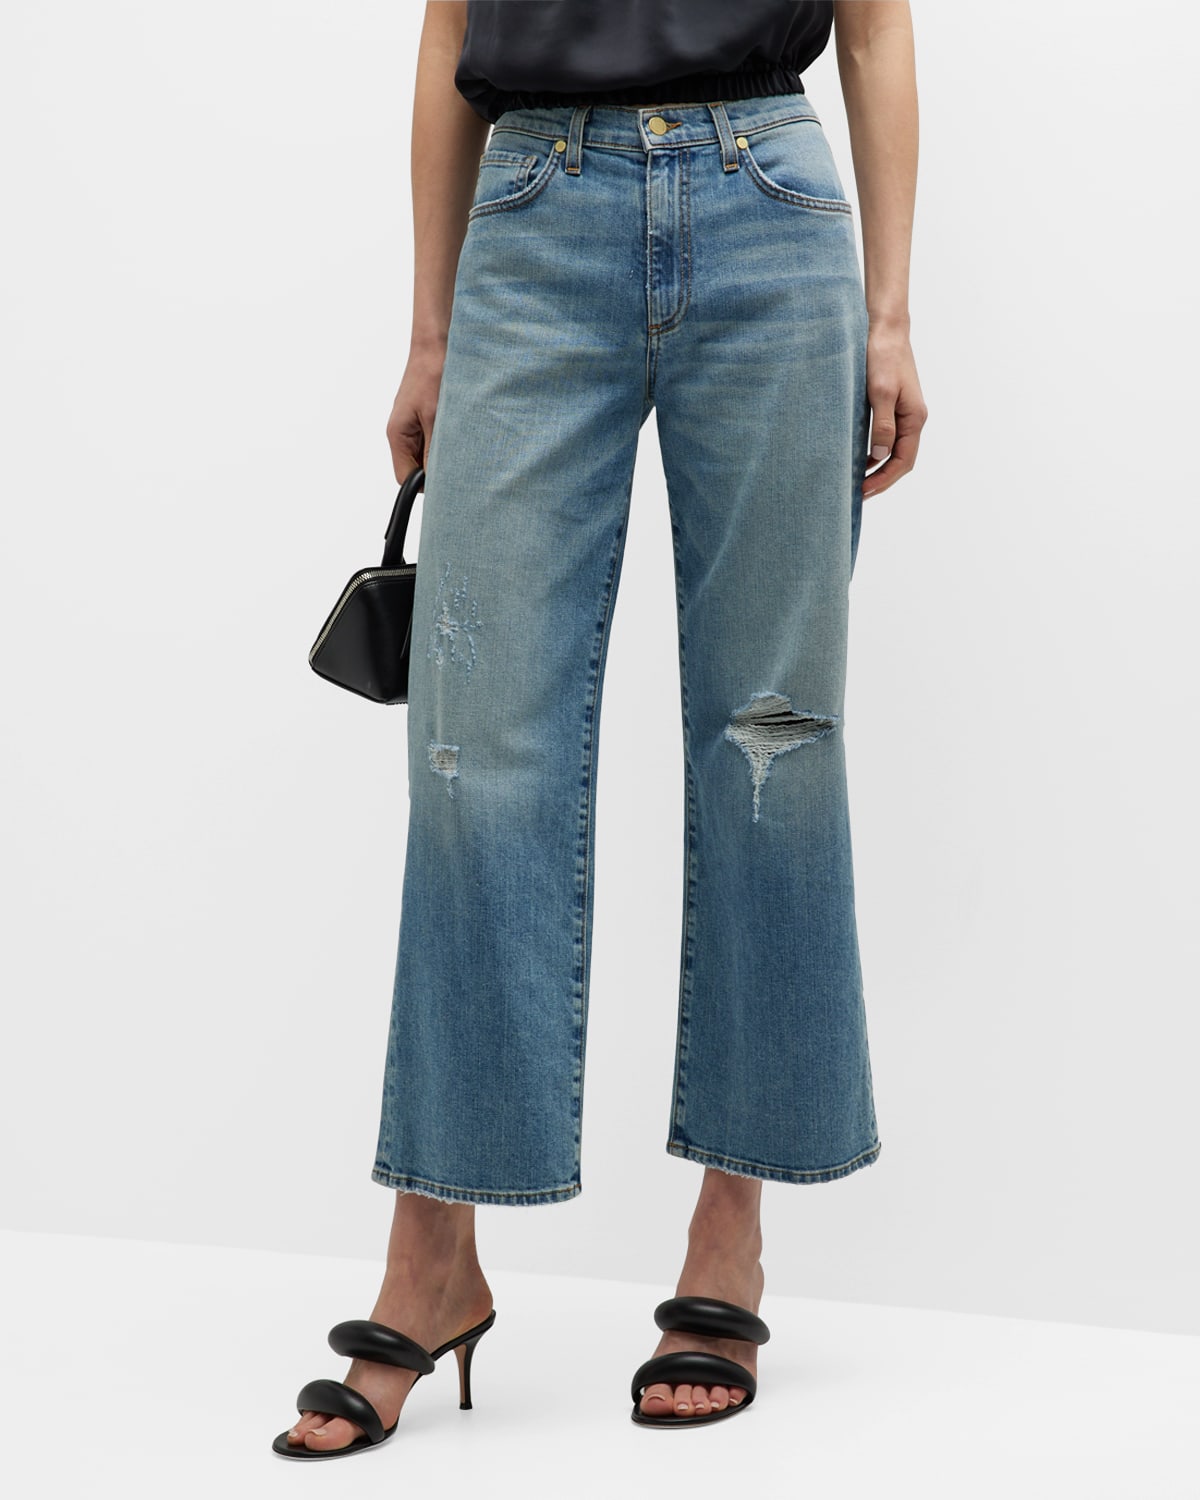 Ramy Brook Angela High Rise Ripped Ankle Jeans In Distressed Light Wash